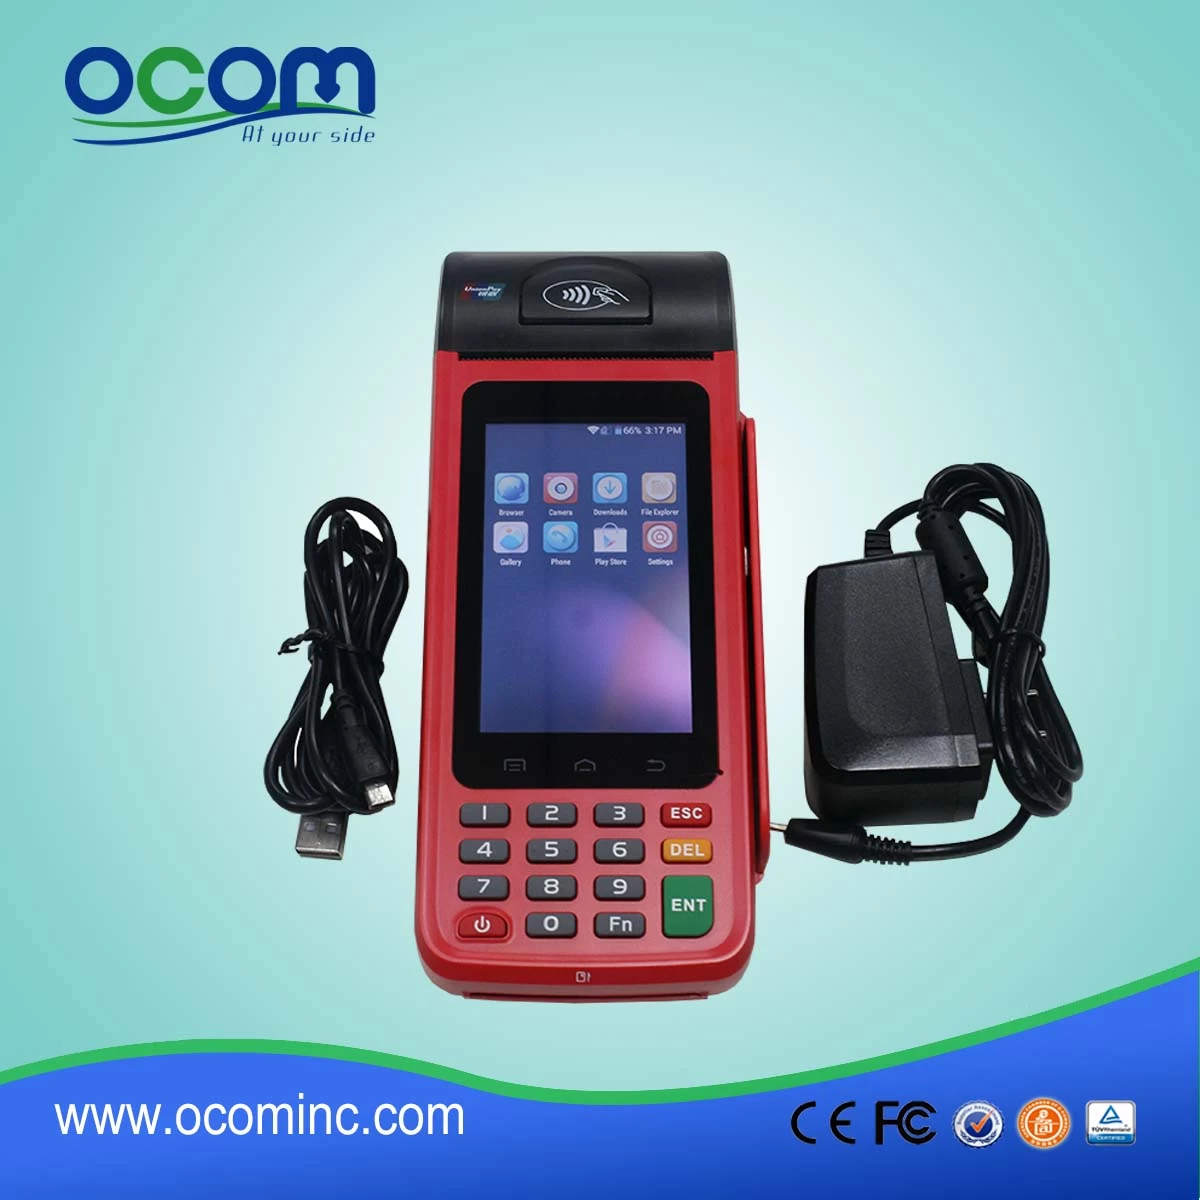 P8000S handheld android wireless pos terminal with barcode card reader